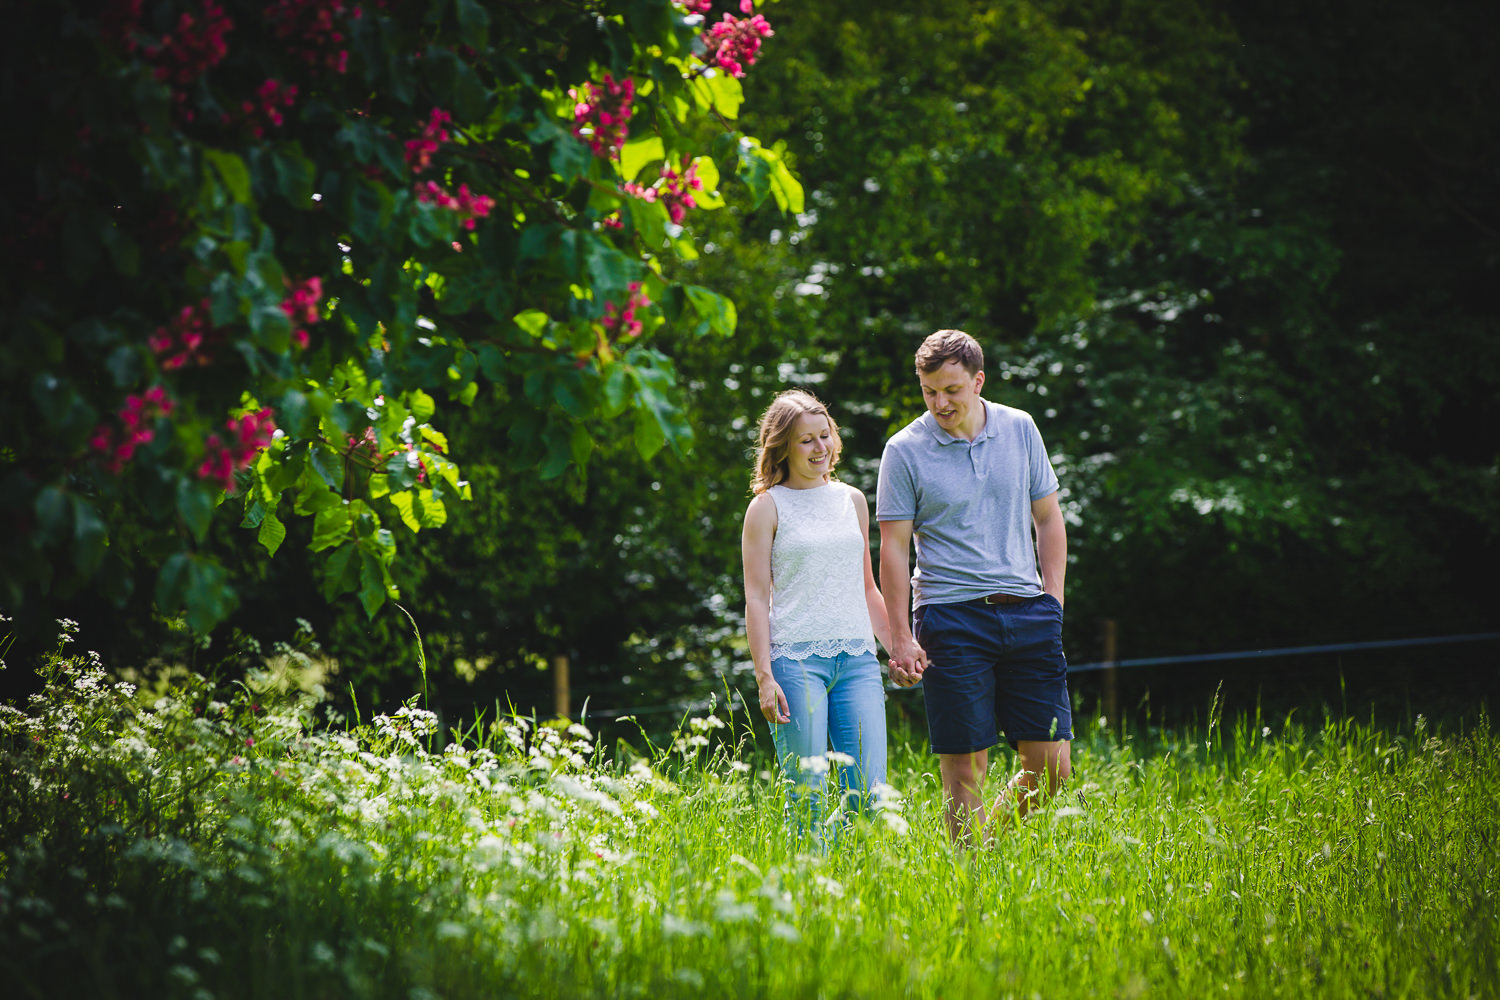 Engagement shoot photo captured by Cambridge Photographer with couple in a field walking amongst trees, leaves and flowers